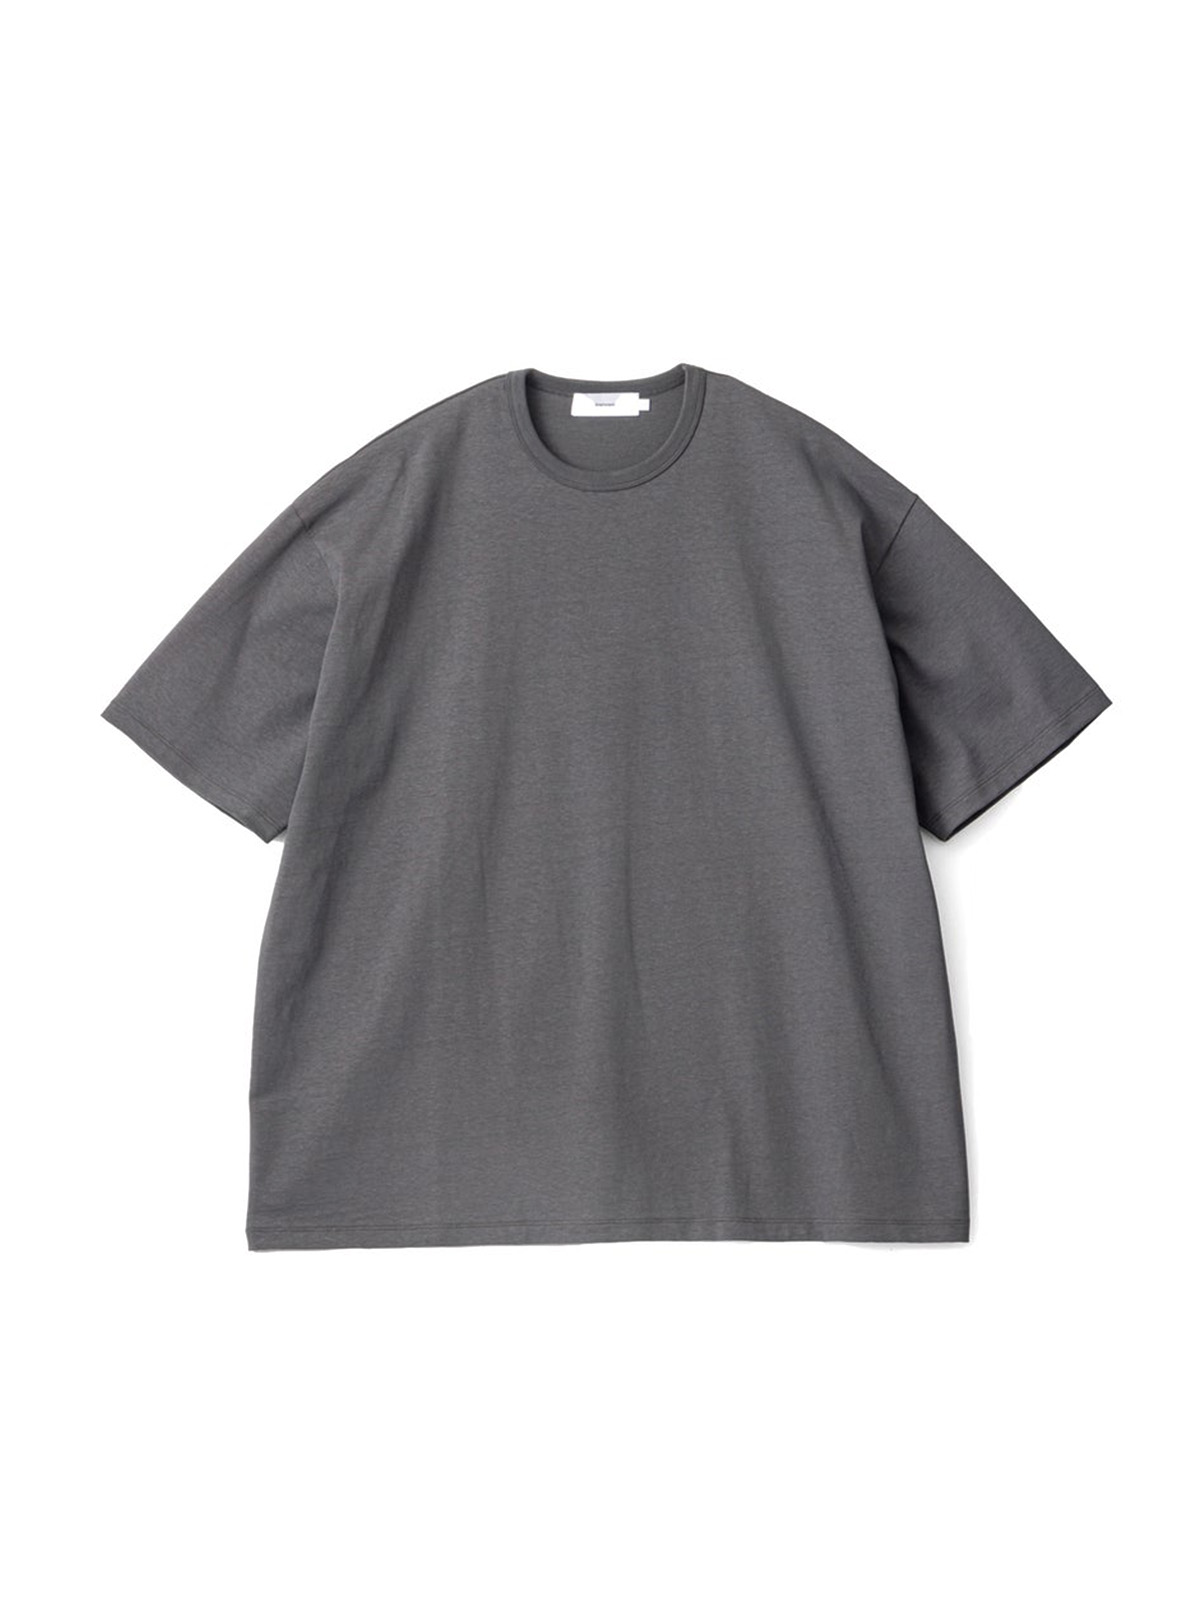 [WED TALKS EVENT] RECYCLED COTTON JERSEY S/S TEE (GRAY)